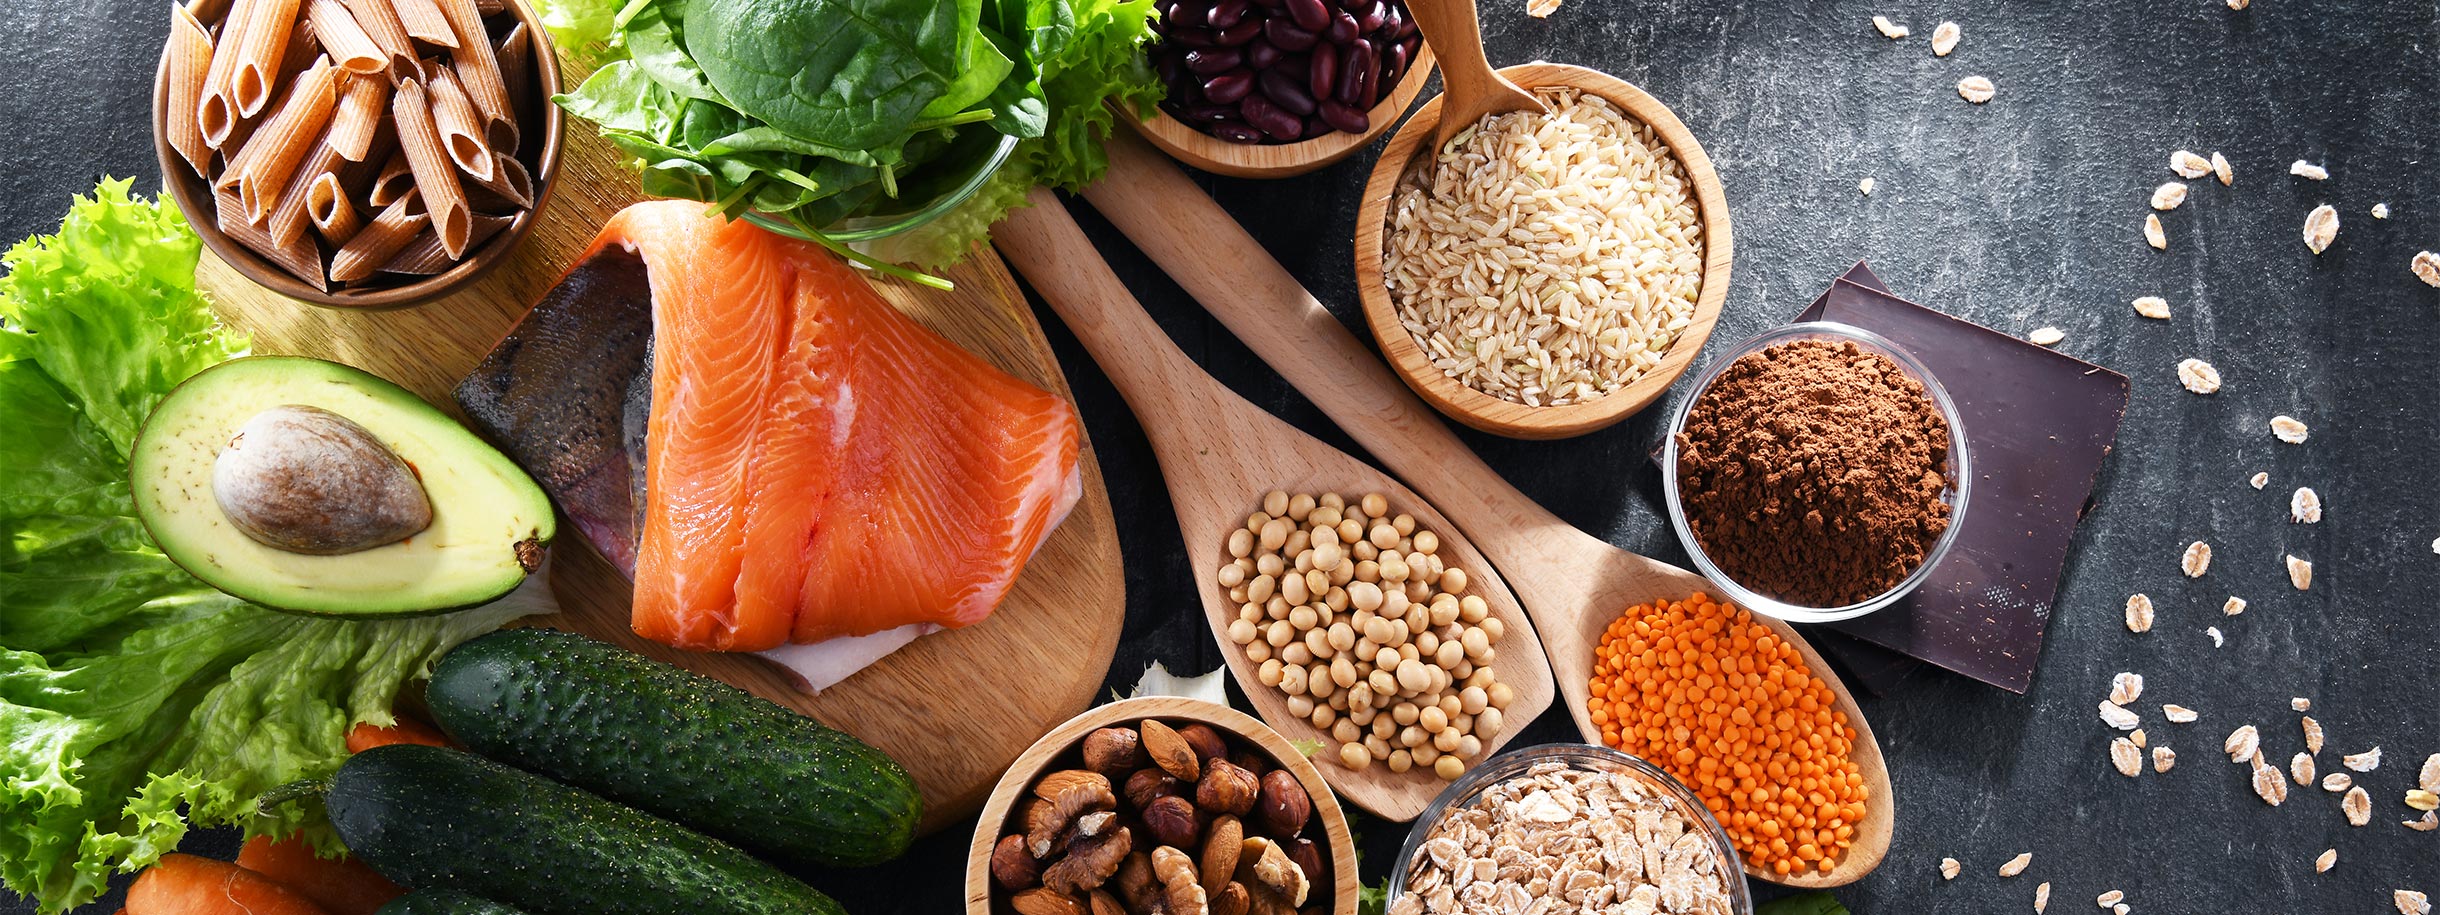 image of healthy foods including salmon, avocado, nuts, seeds, cucumbers, leafy greens and more